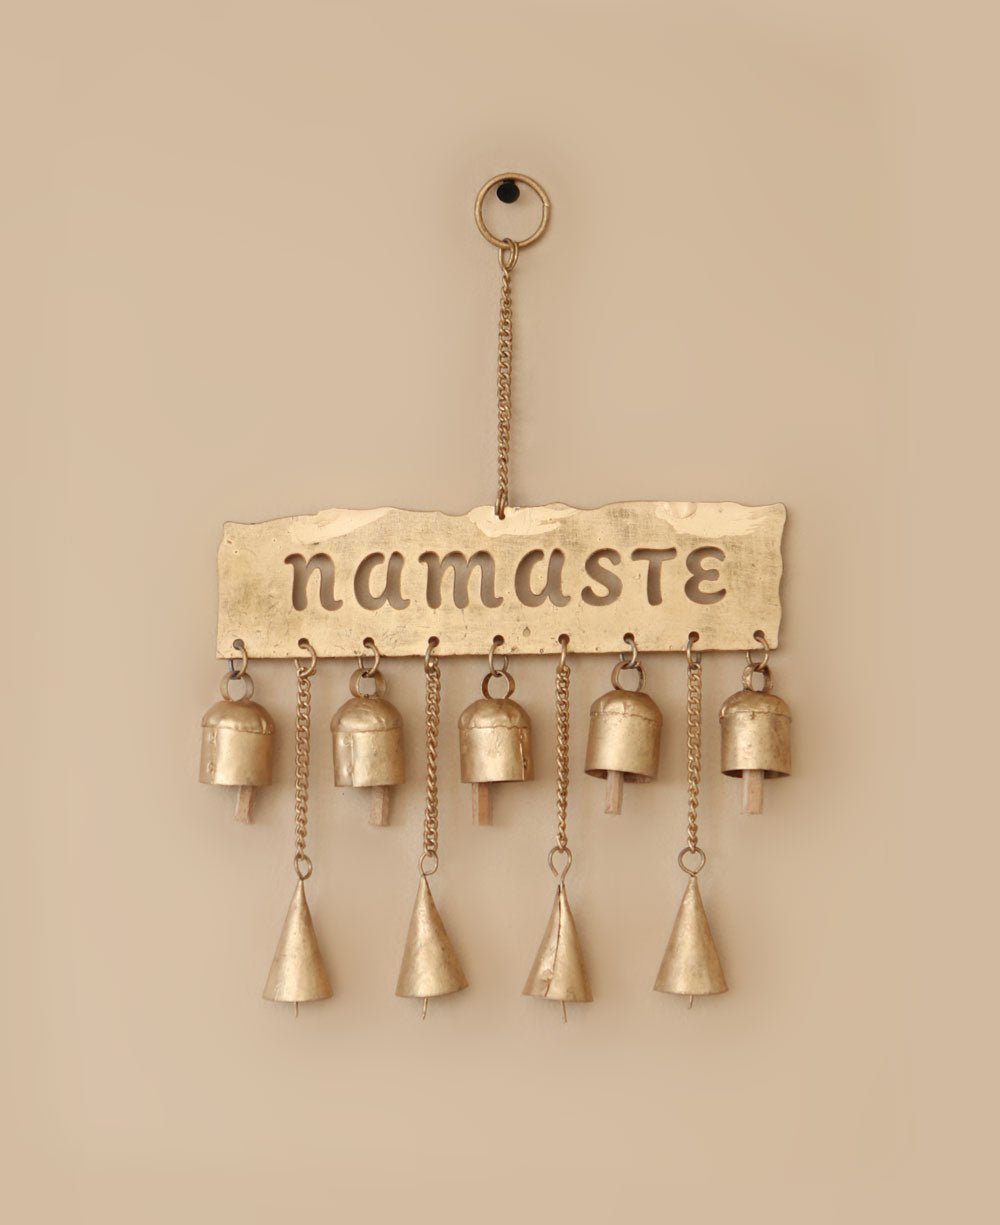 Fairtrade Namaste Bell Chime Wall Hanging - Wind Chimes